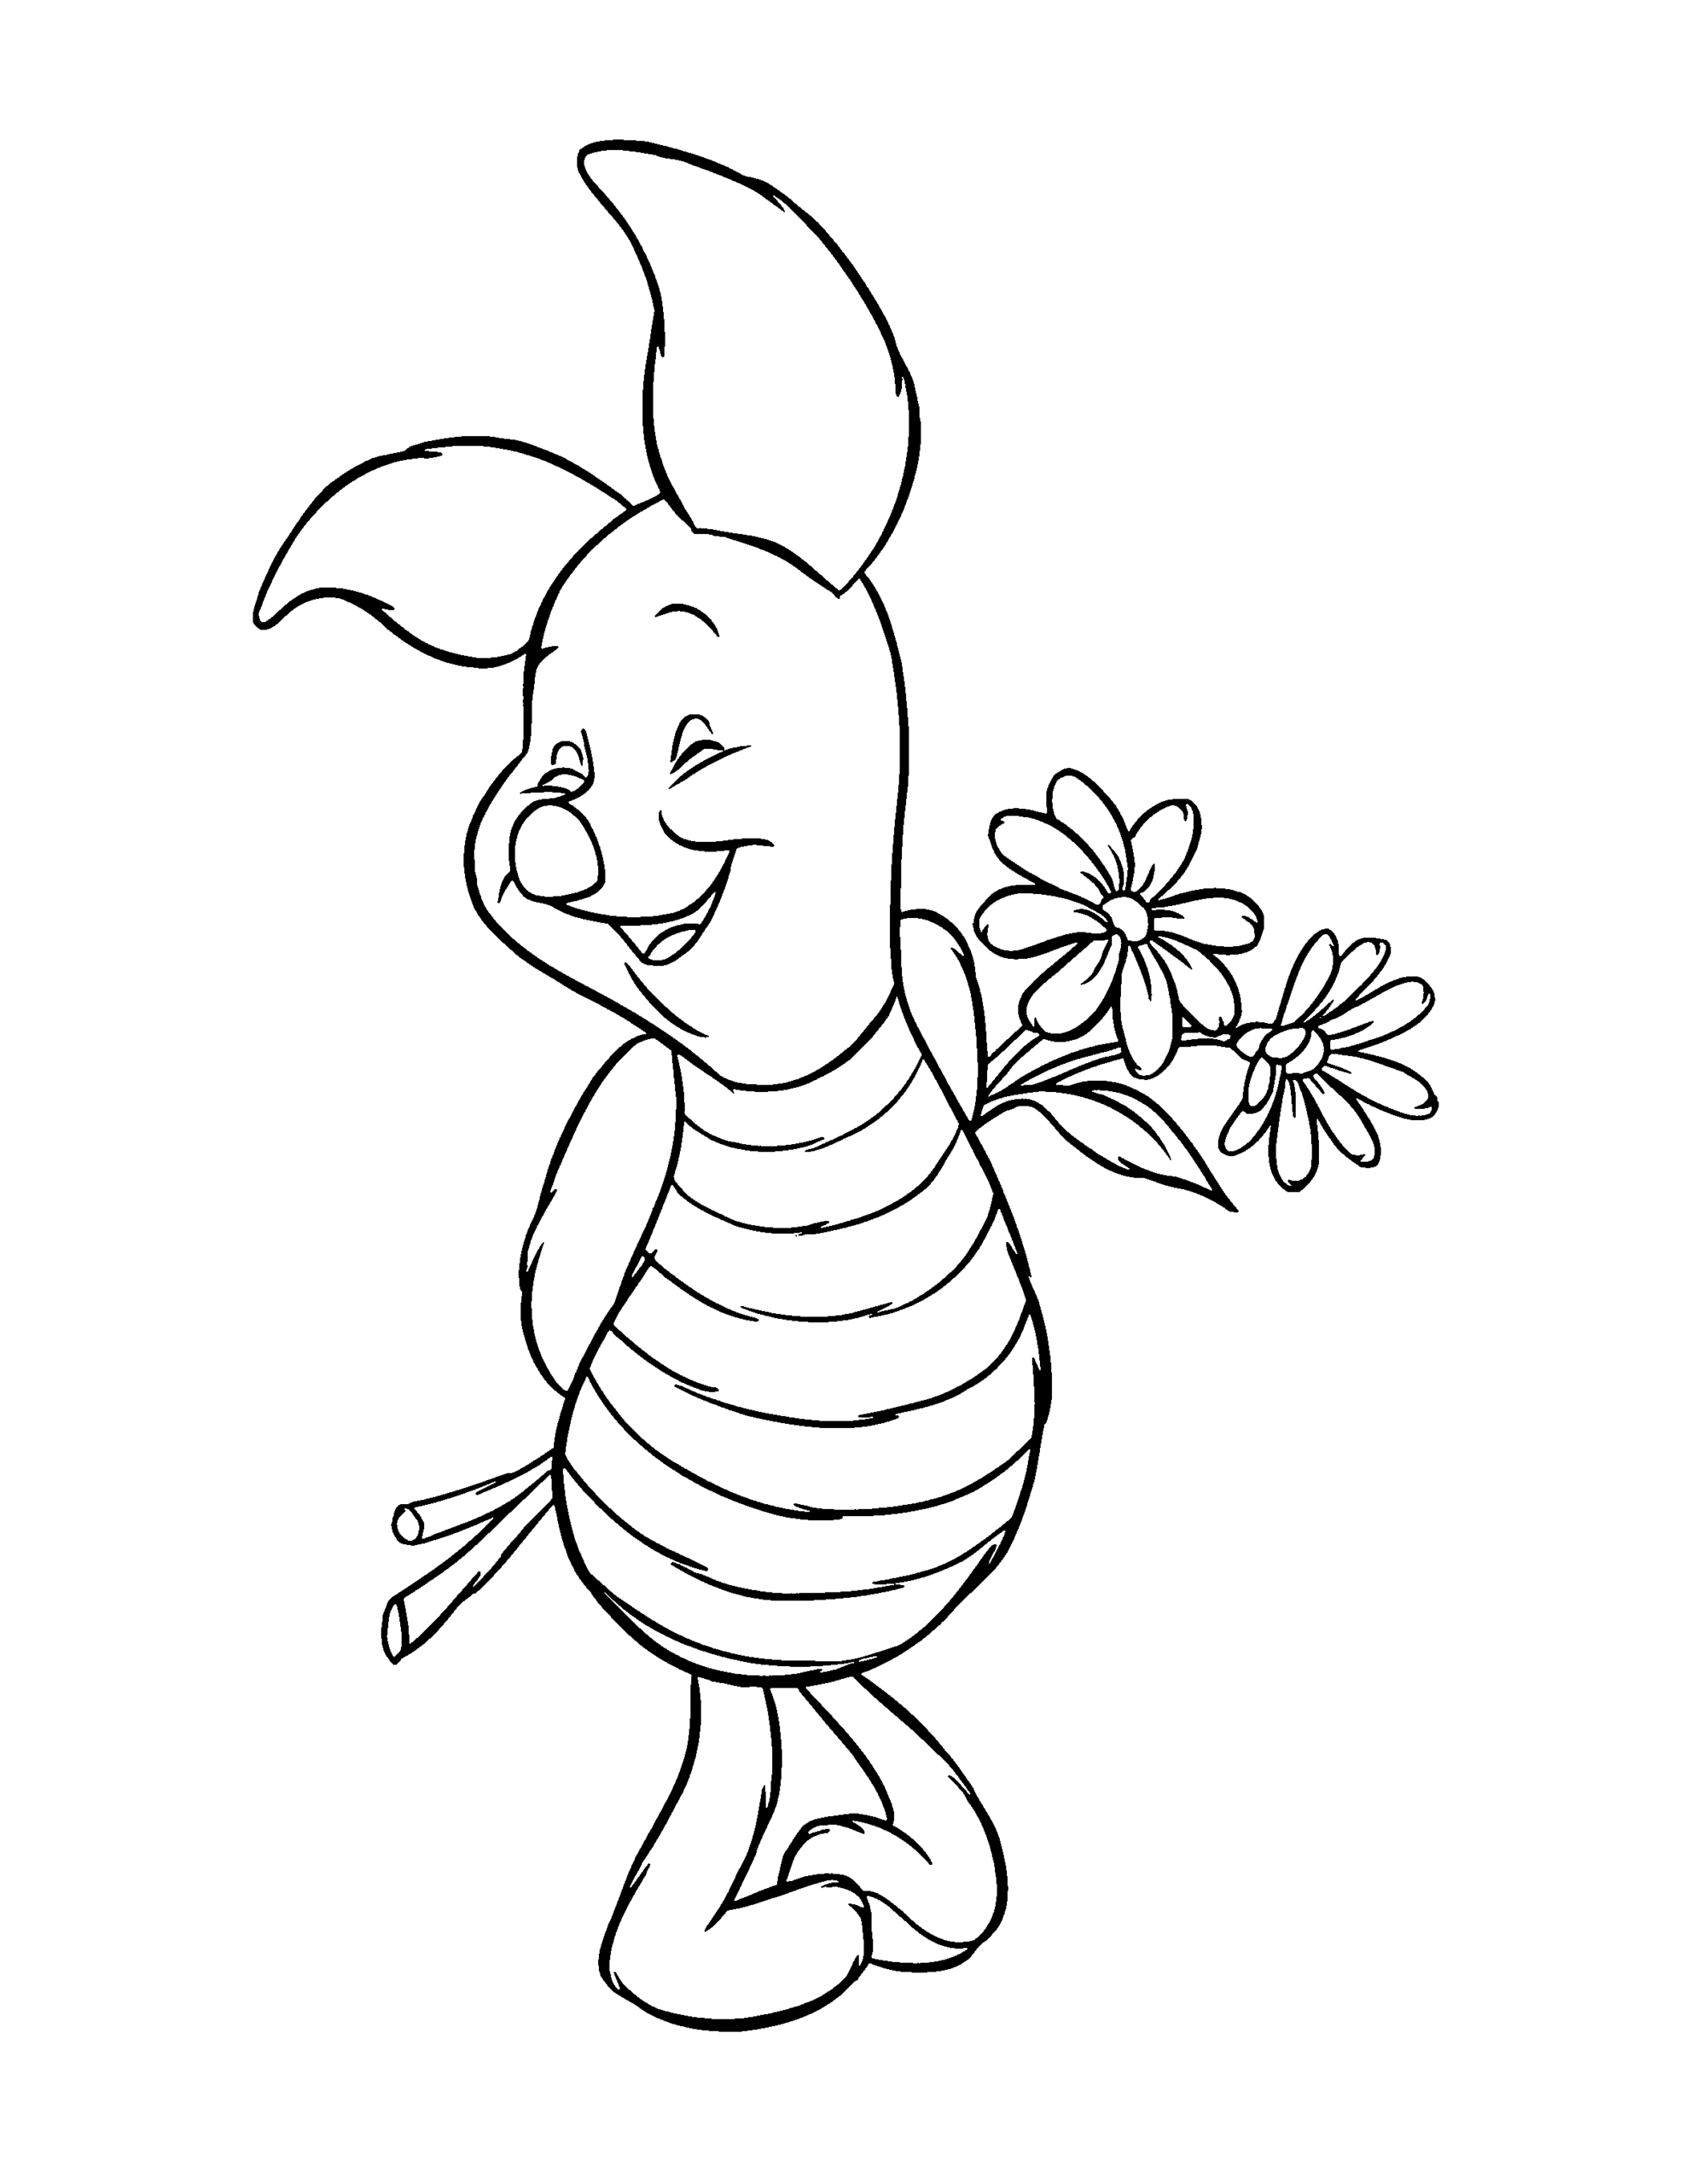 Winnie the Pooh Coloring Pages Cartoons winnie the pooh 40 Printable 2020 7147 Coloring4free